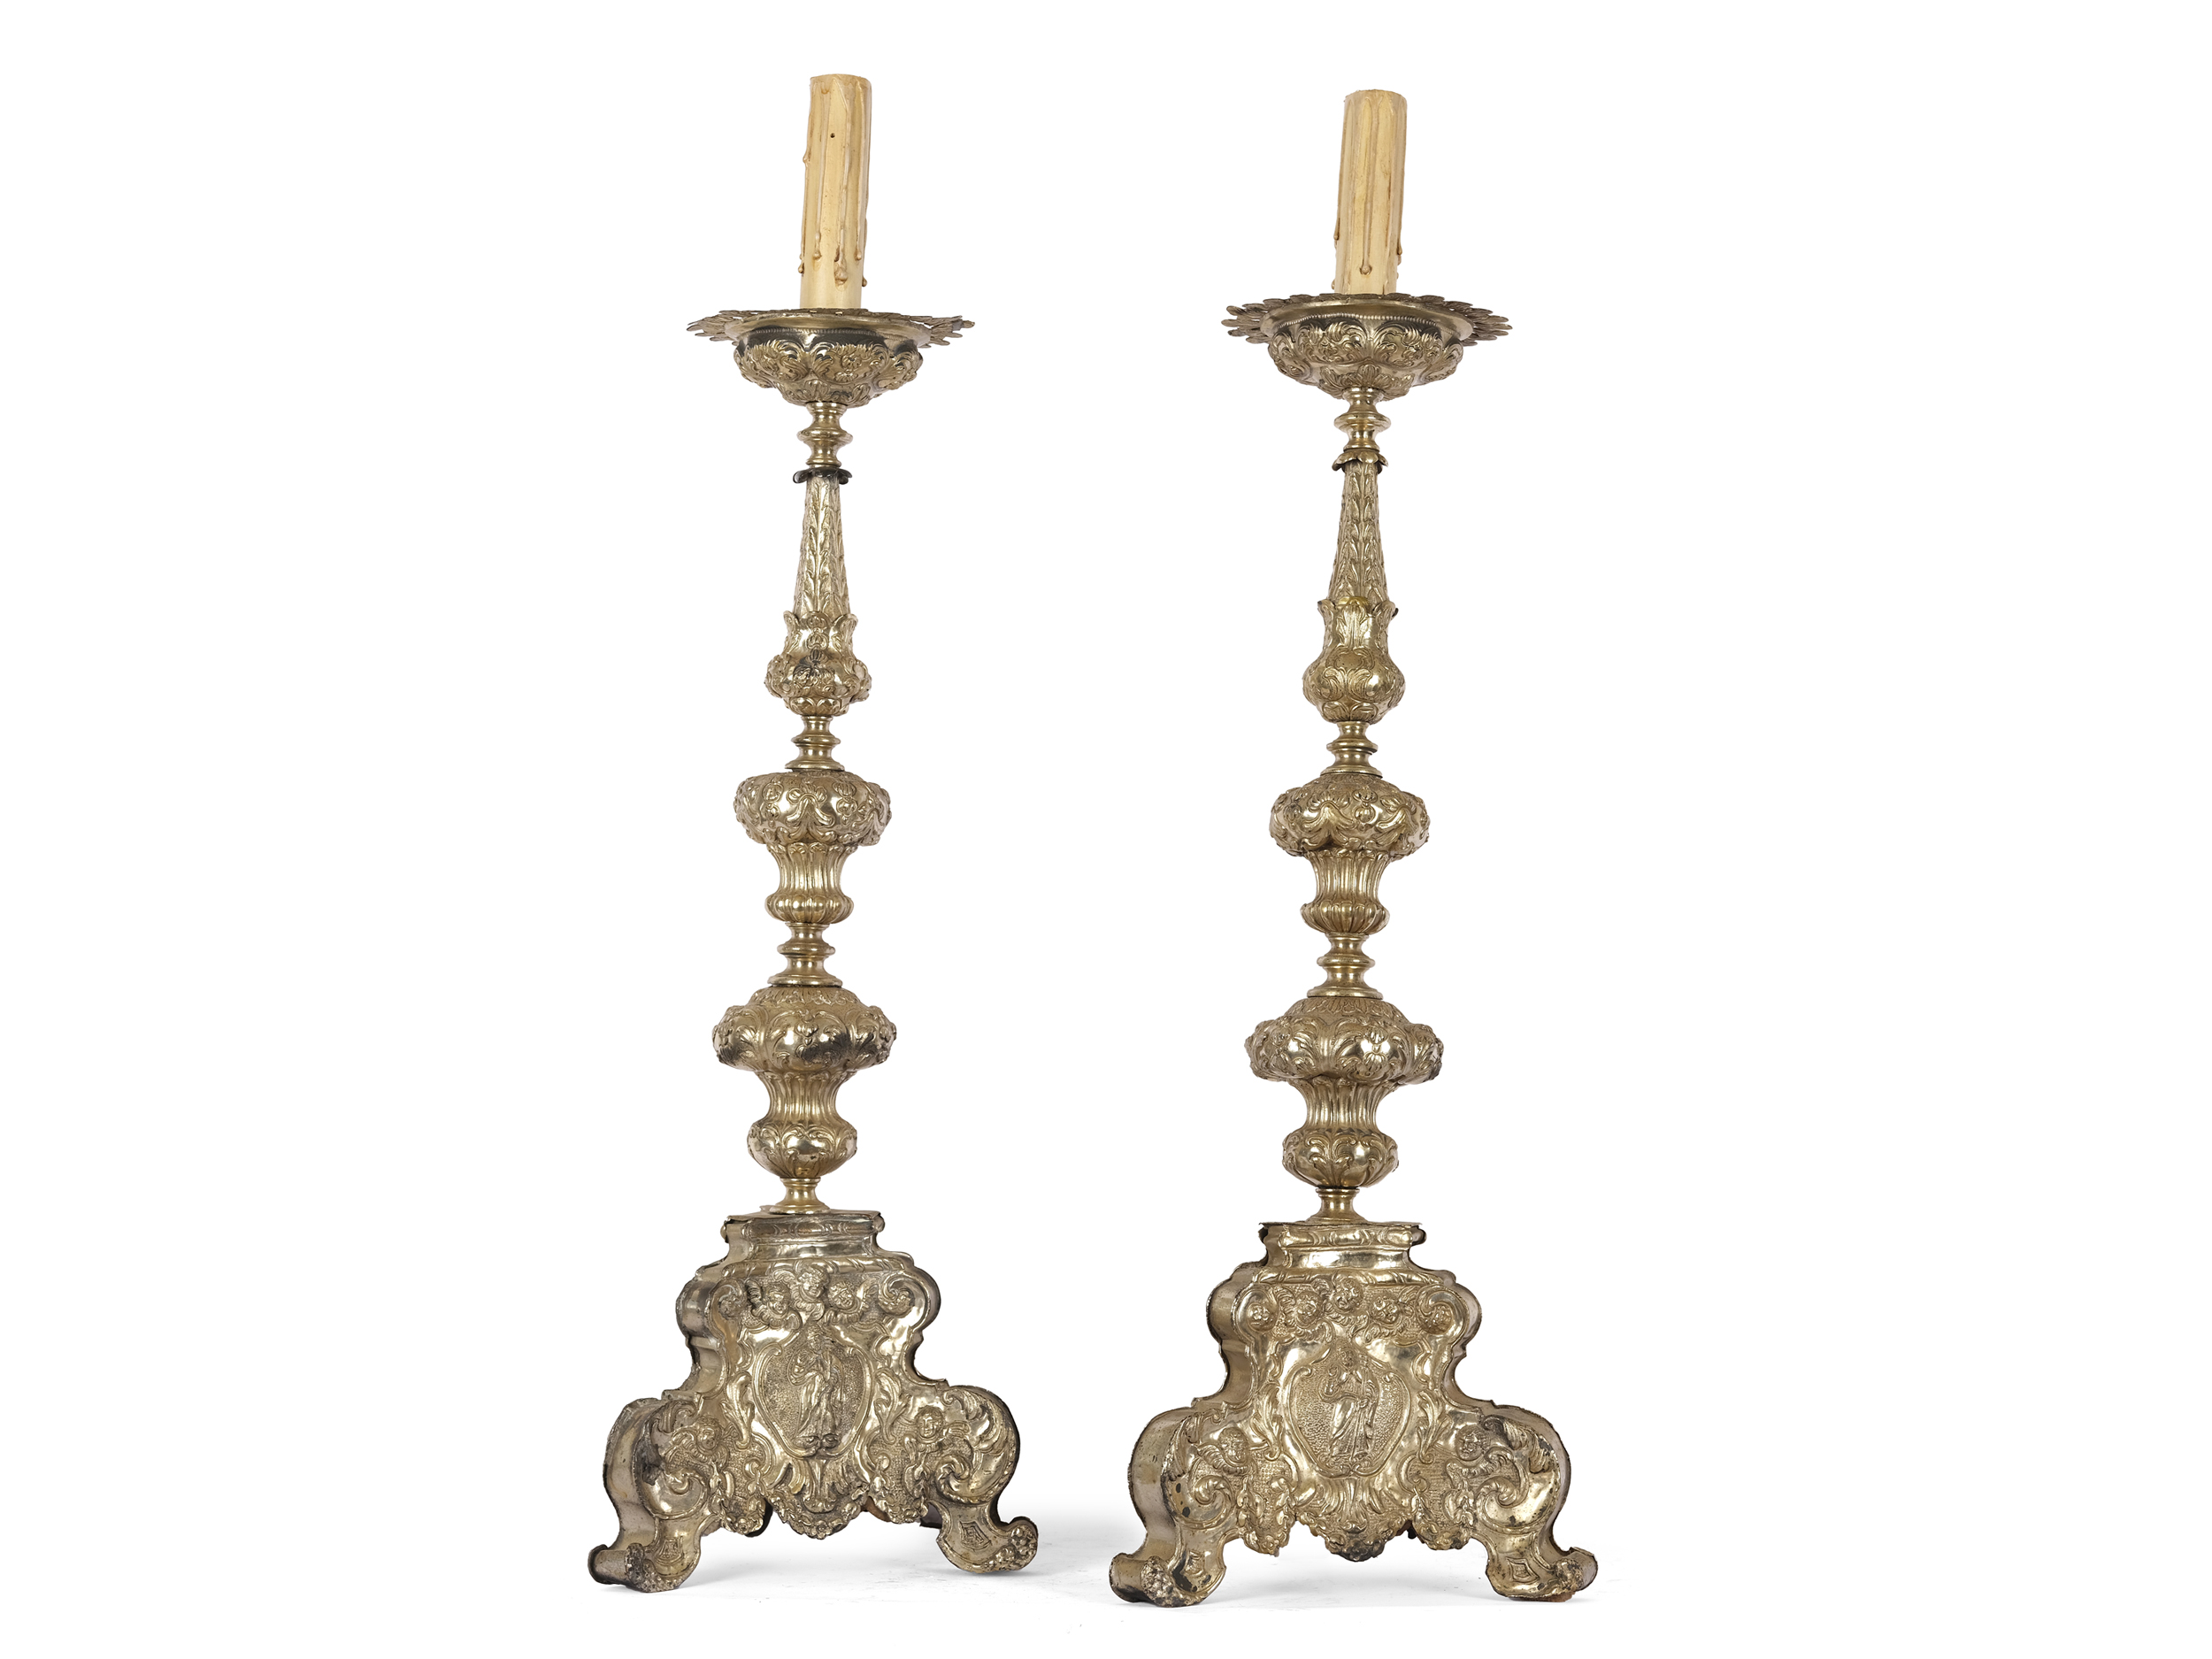 Pair of baroque candlesticks, 18th century - Image 3 of 3